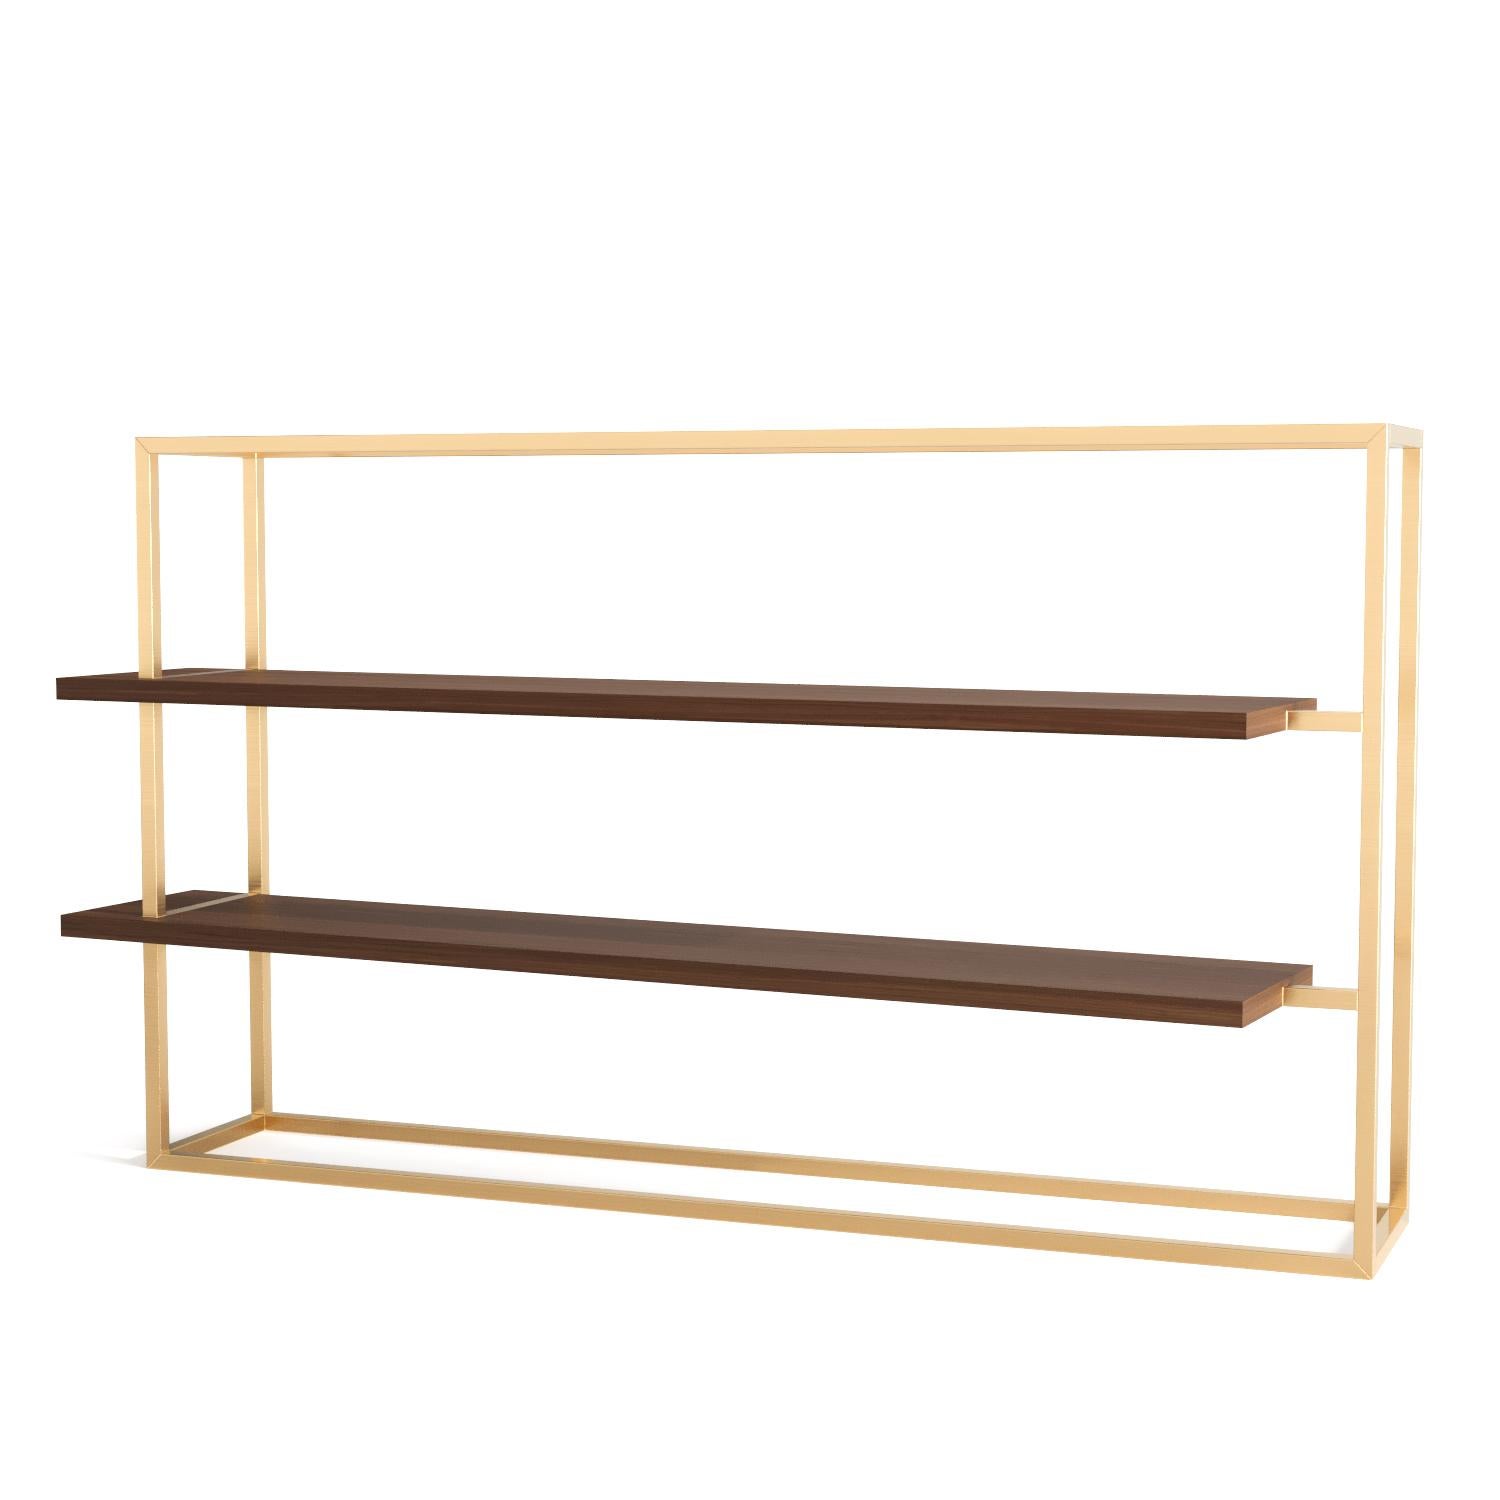 Portuguese Modern Bookcase with Shelves in Walnut Wood and Brushed Brass For Sale